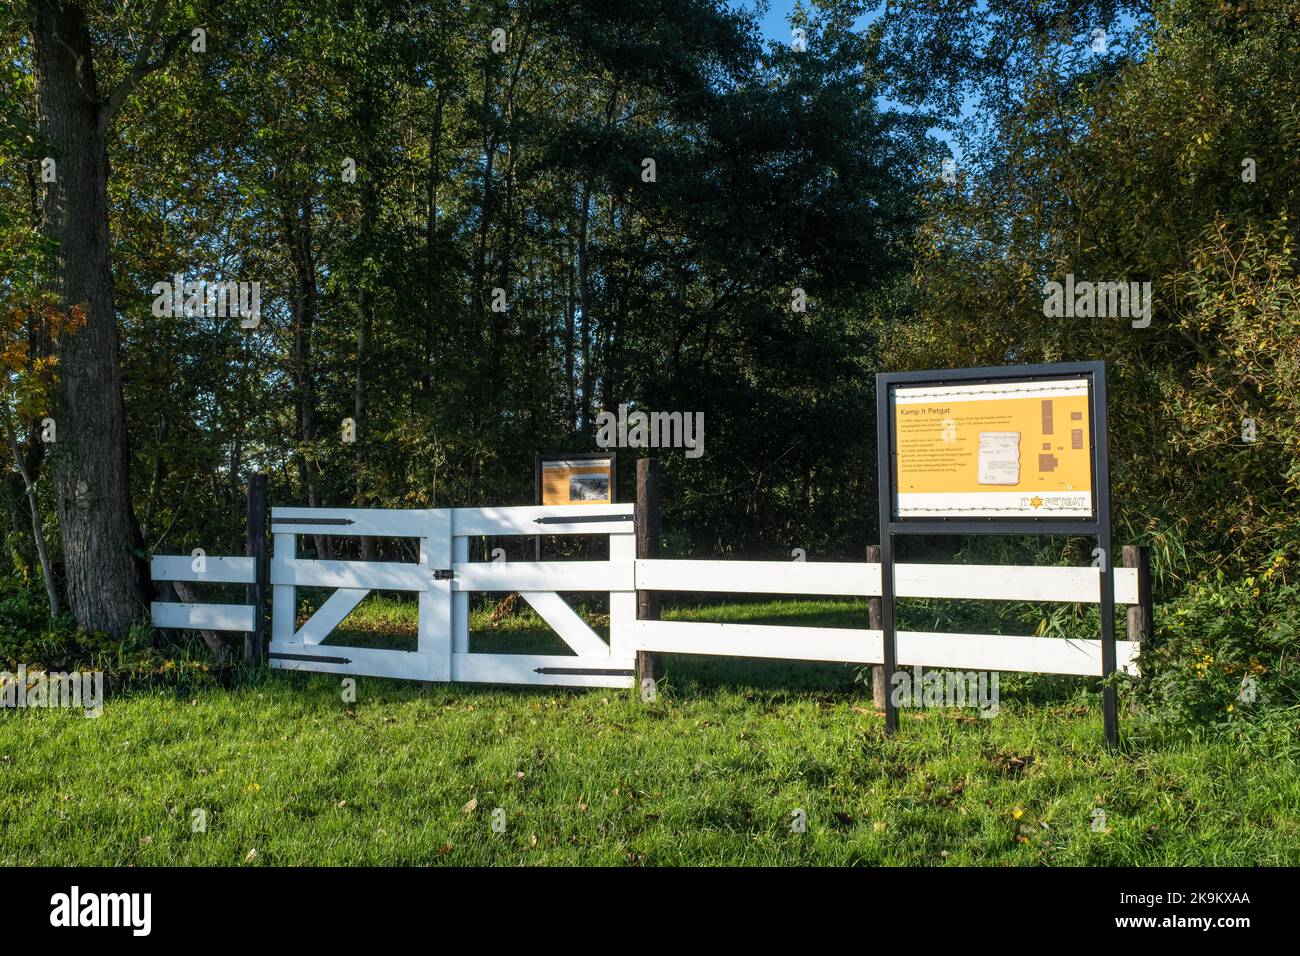 Blesdijke, Netherlands - Oct 18, 2022: It Petgat labour camp was located on the Nijksweg in Blesdijke and was used as a prison camp for Jewish interne Stock Photo